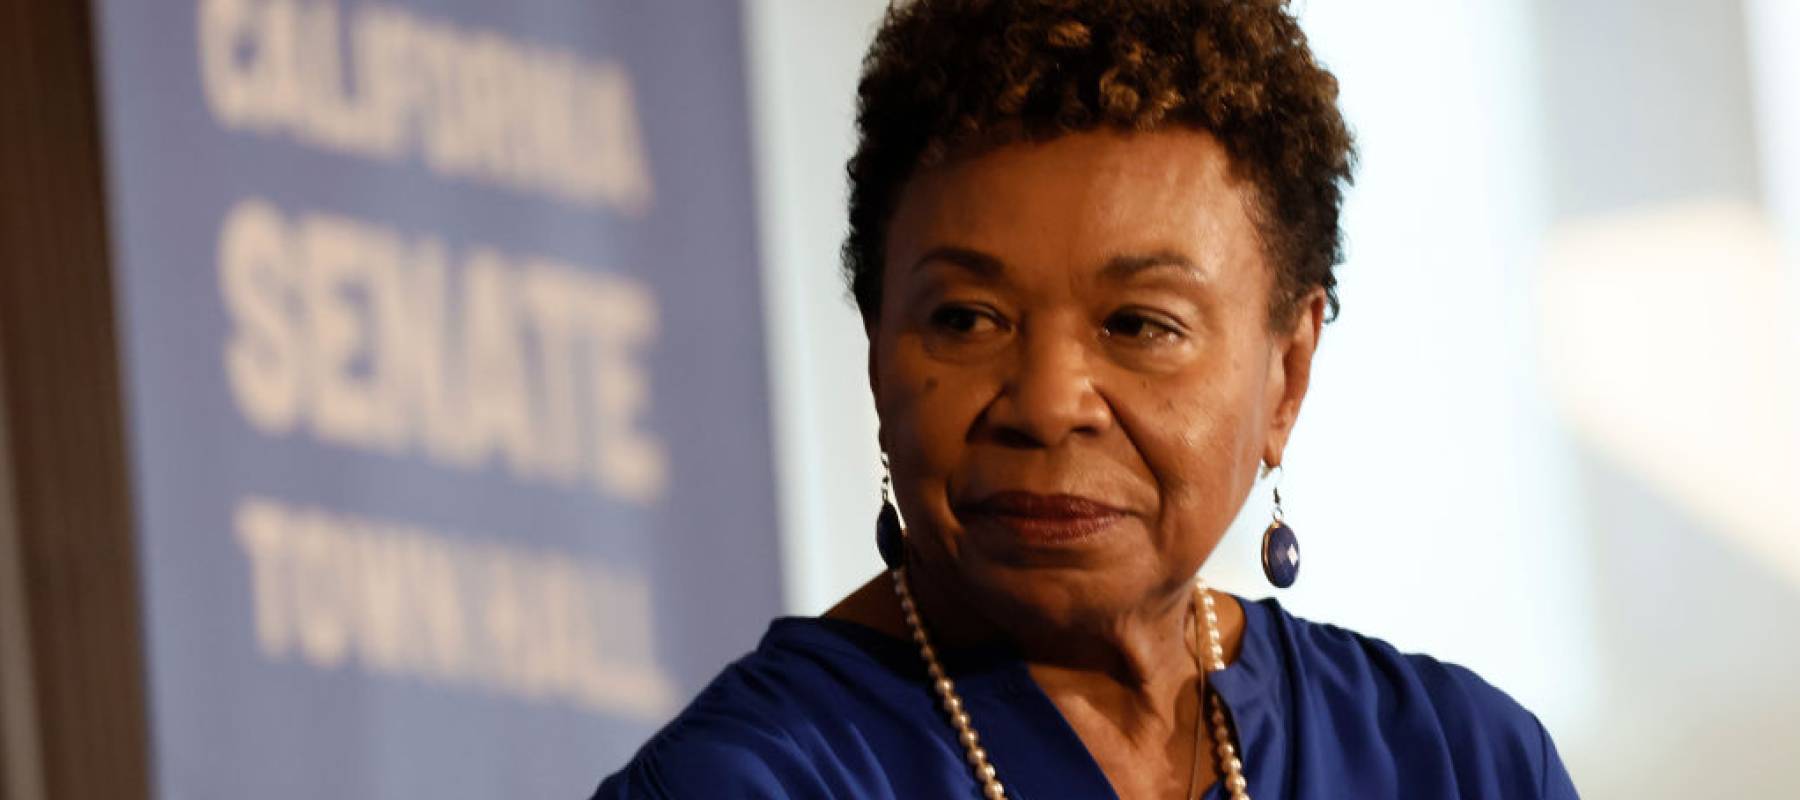 Rep. Barbara Lee speaks at a town hall hosted by the advocacy group March For Our Lives at East LA College